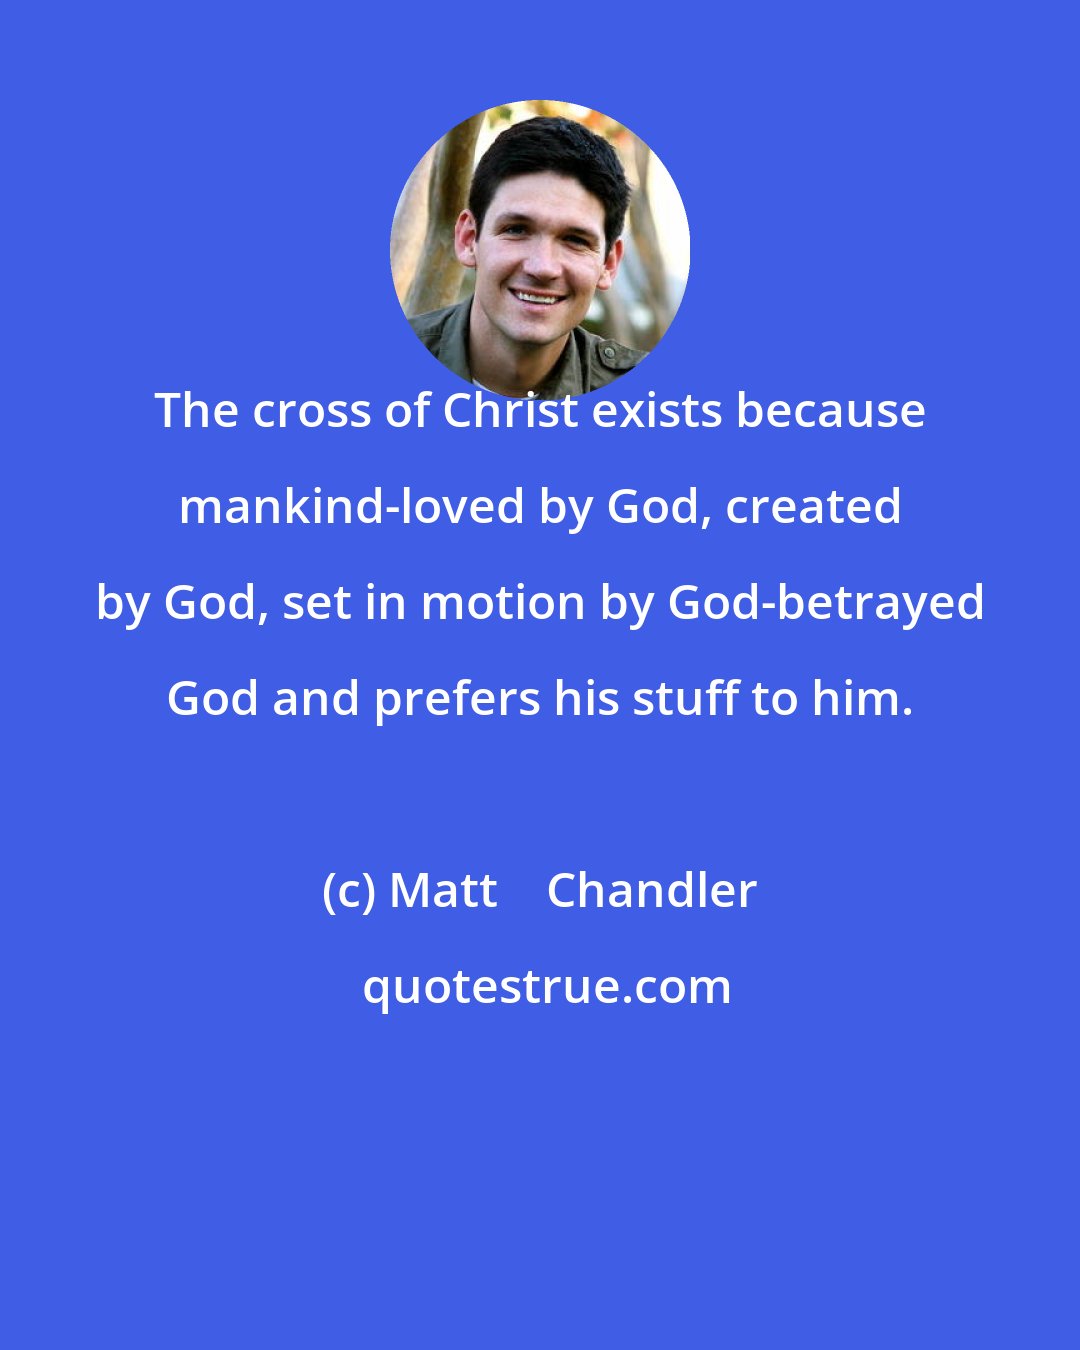 Matt    Chandler: The cross of Christ exists because mankind-loved by God, created by God, set in motion by God-betrayed God and prefers his stuff to him.